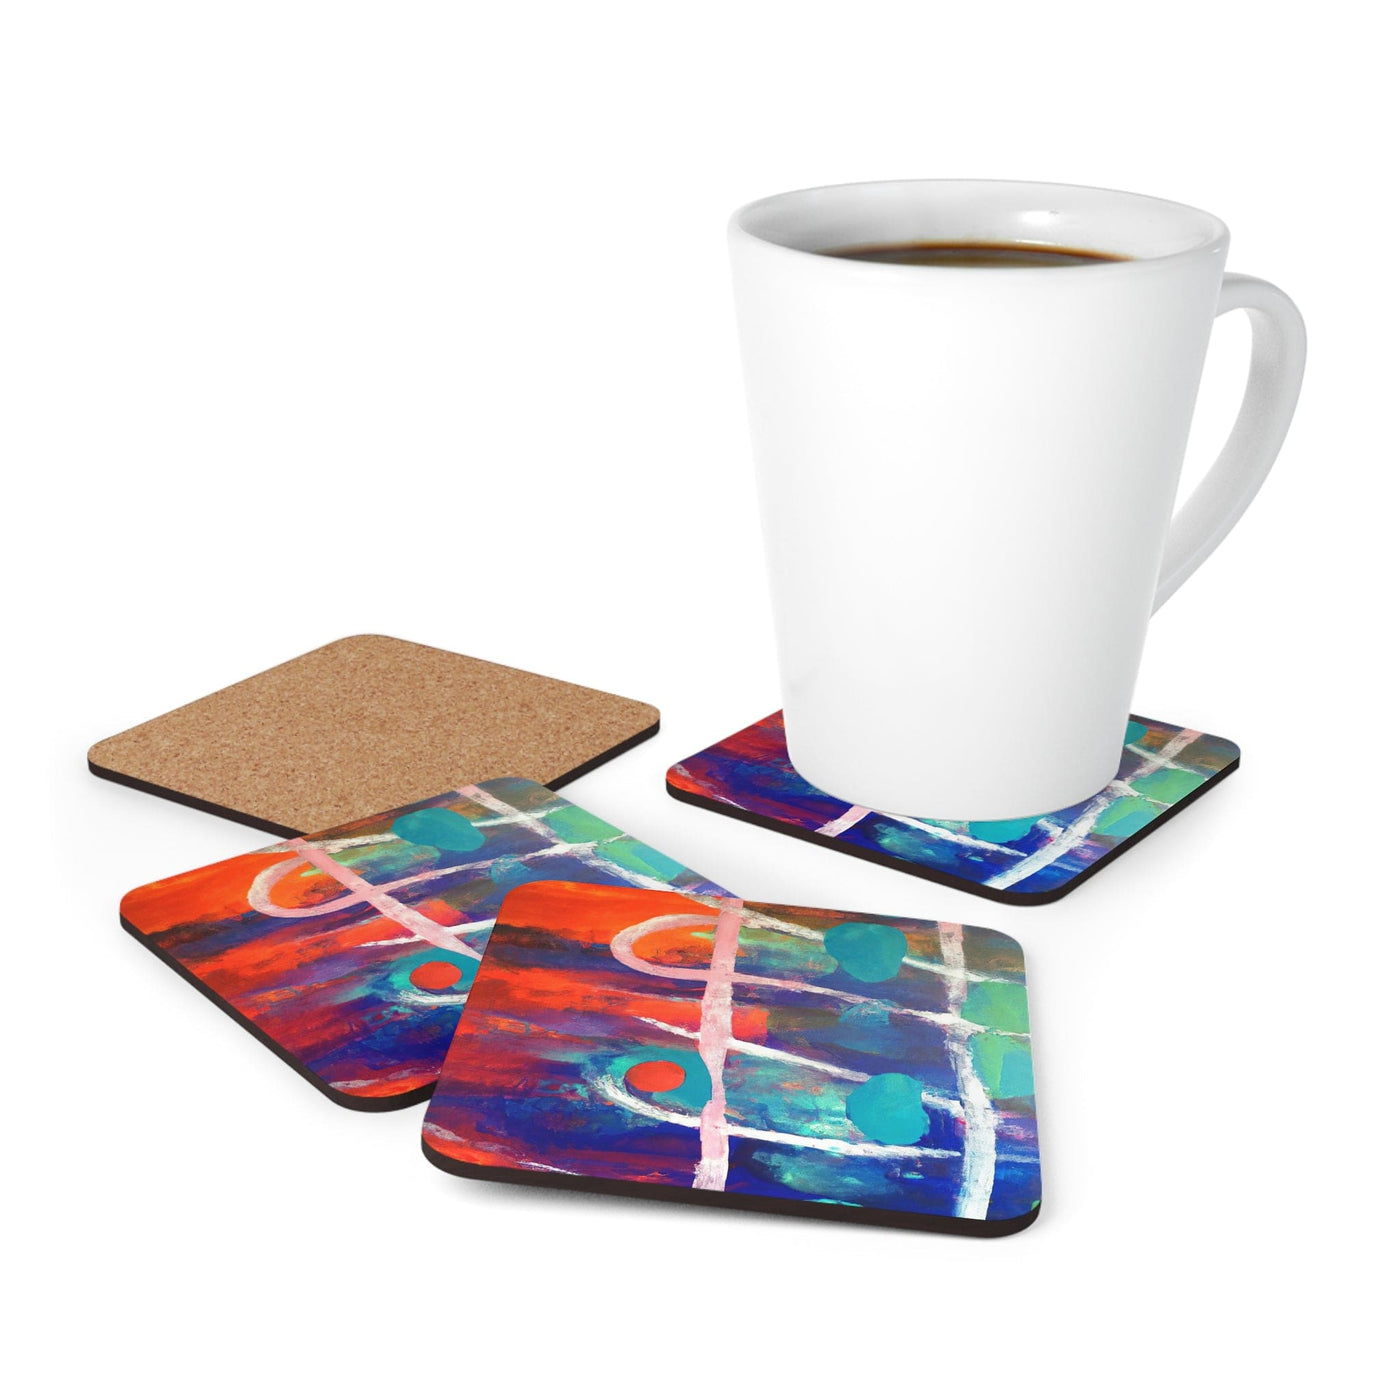 Handcrafted Square Coaster Set Of 4 For Drinks And Cups Red Blue Abstract